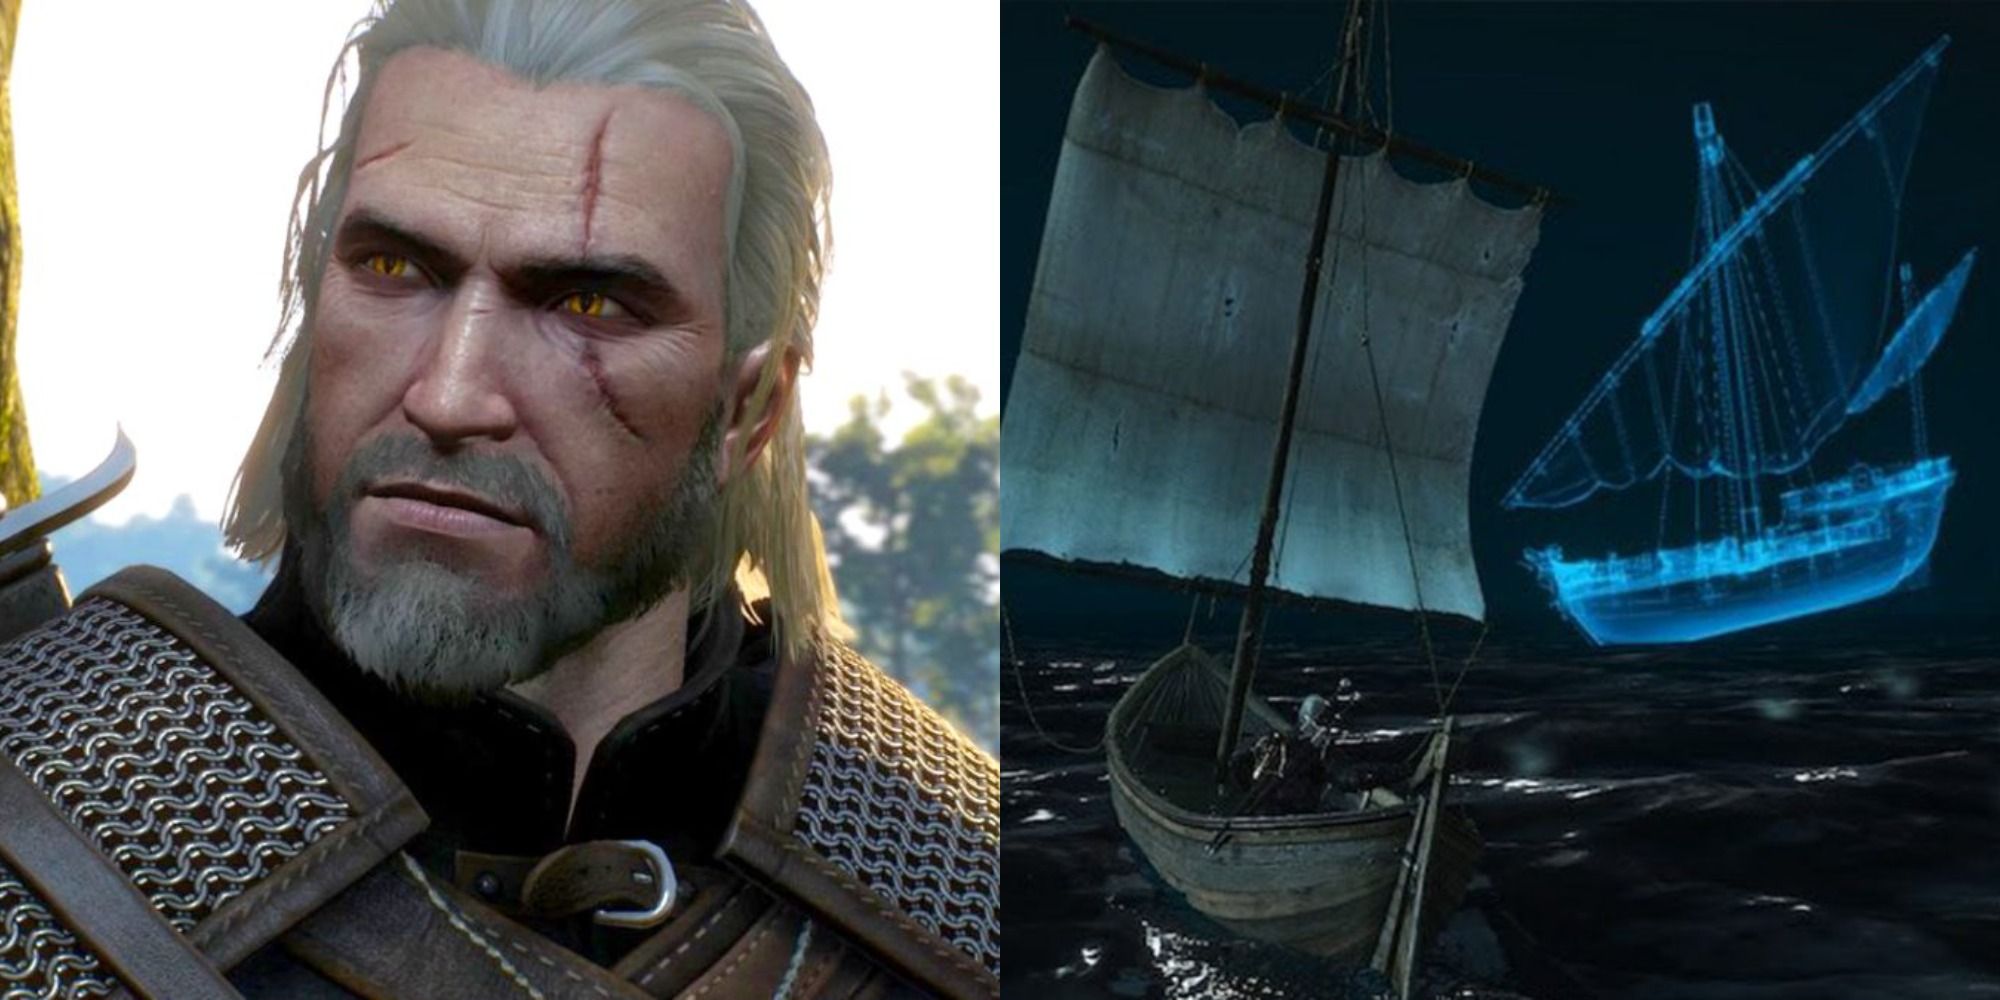 Split image of Geralt and a ship from the Witcher video game series.